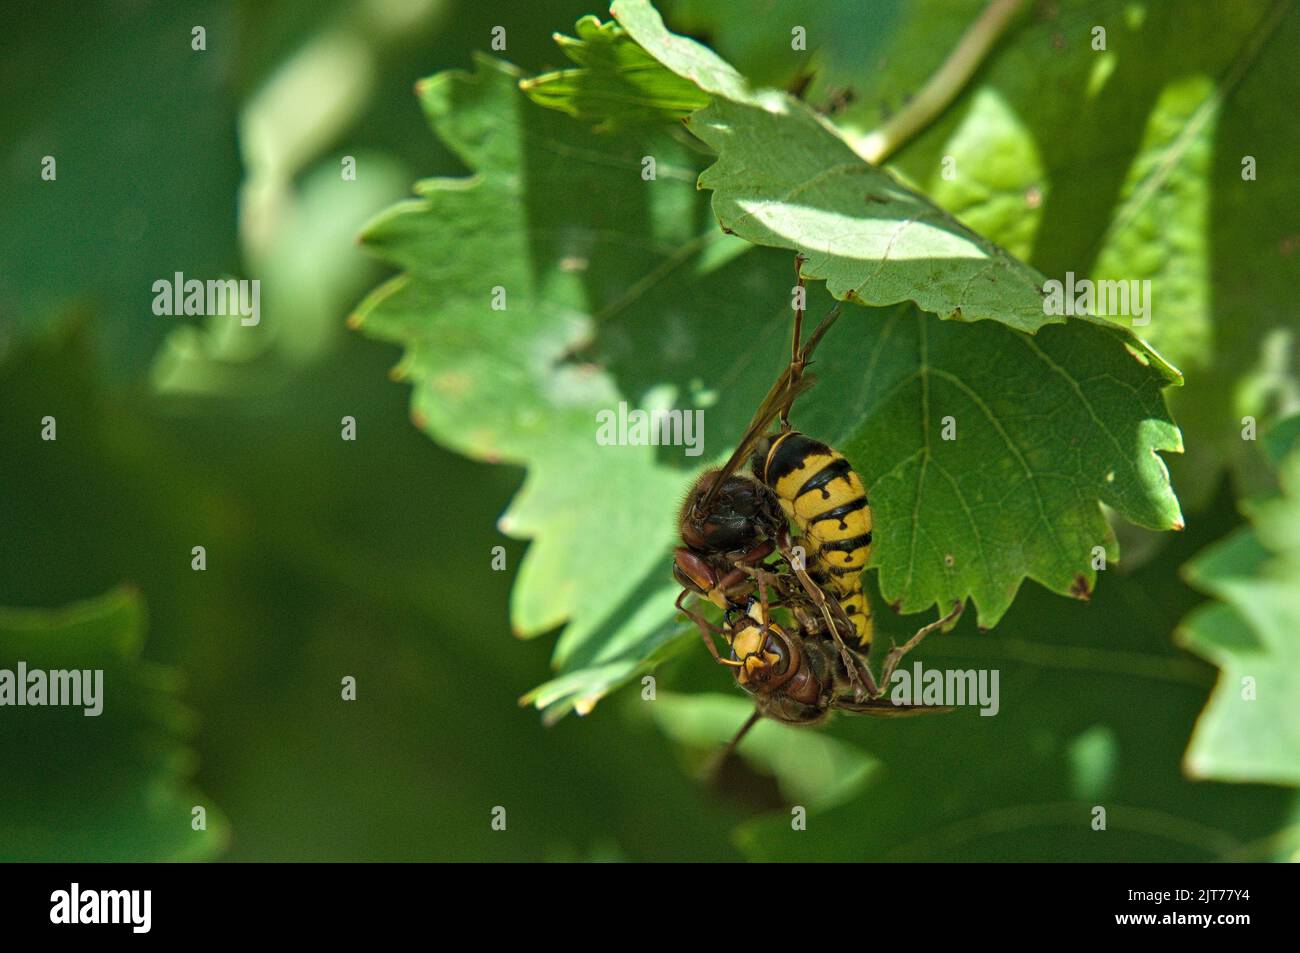 Two hornets in comment fighting before vine leaves Stock Photo